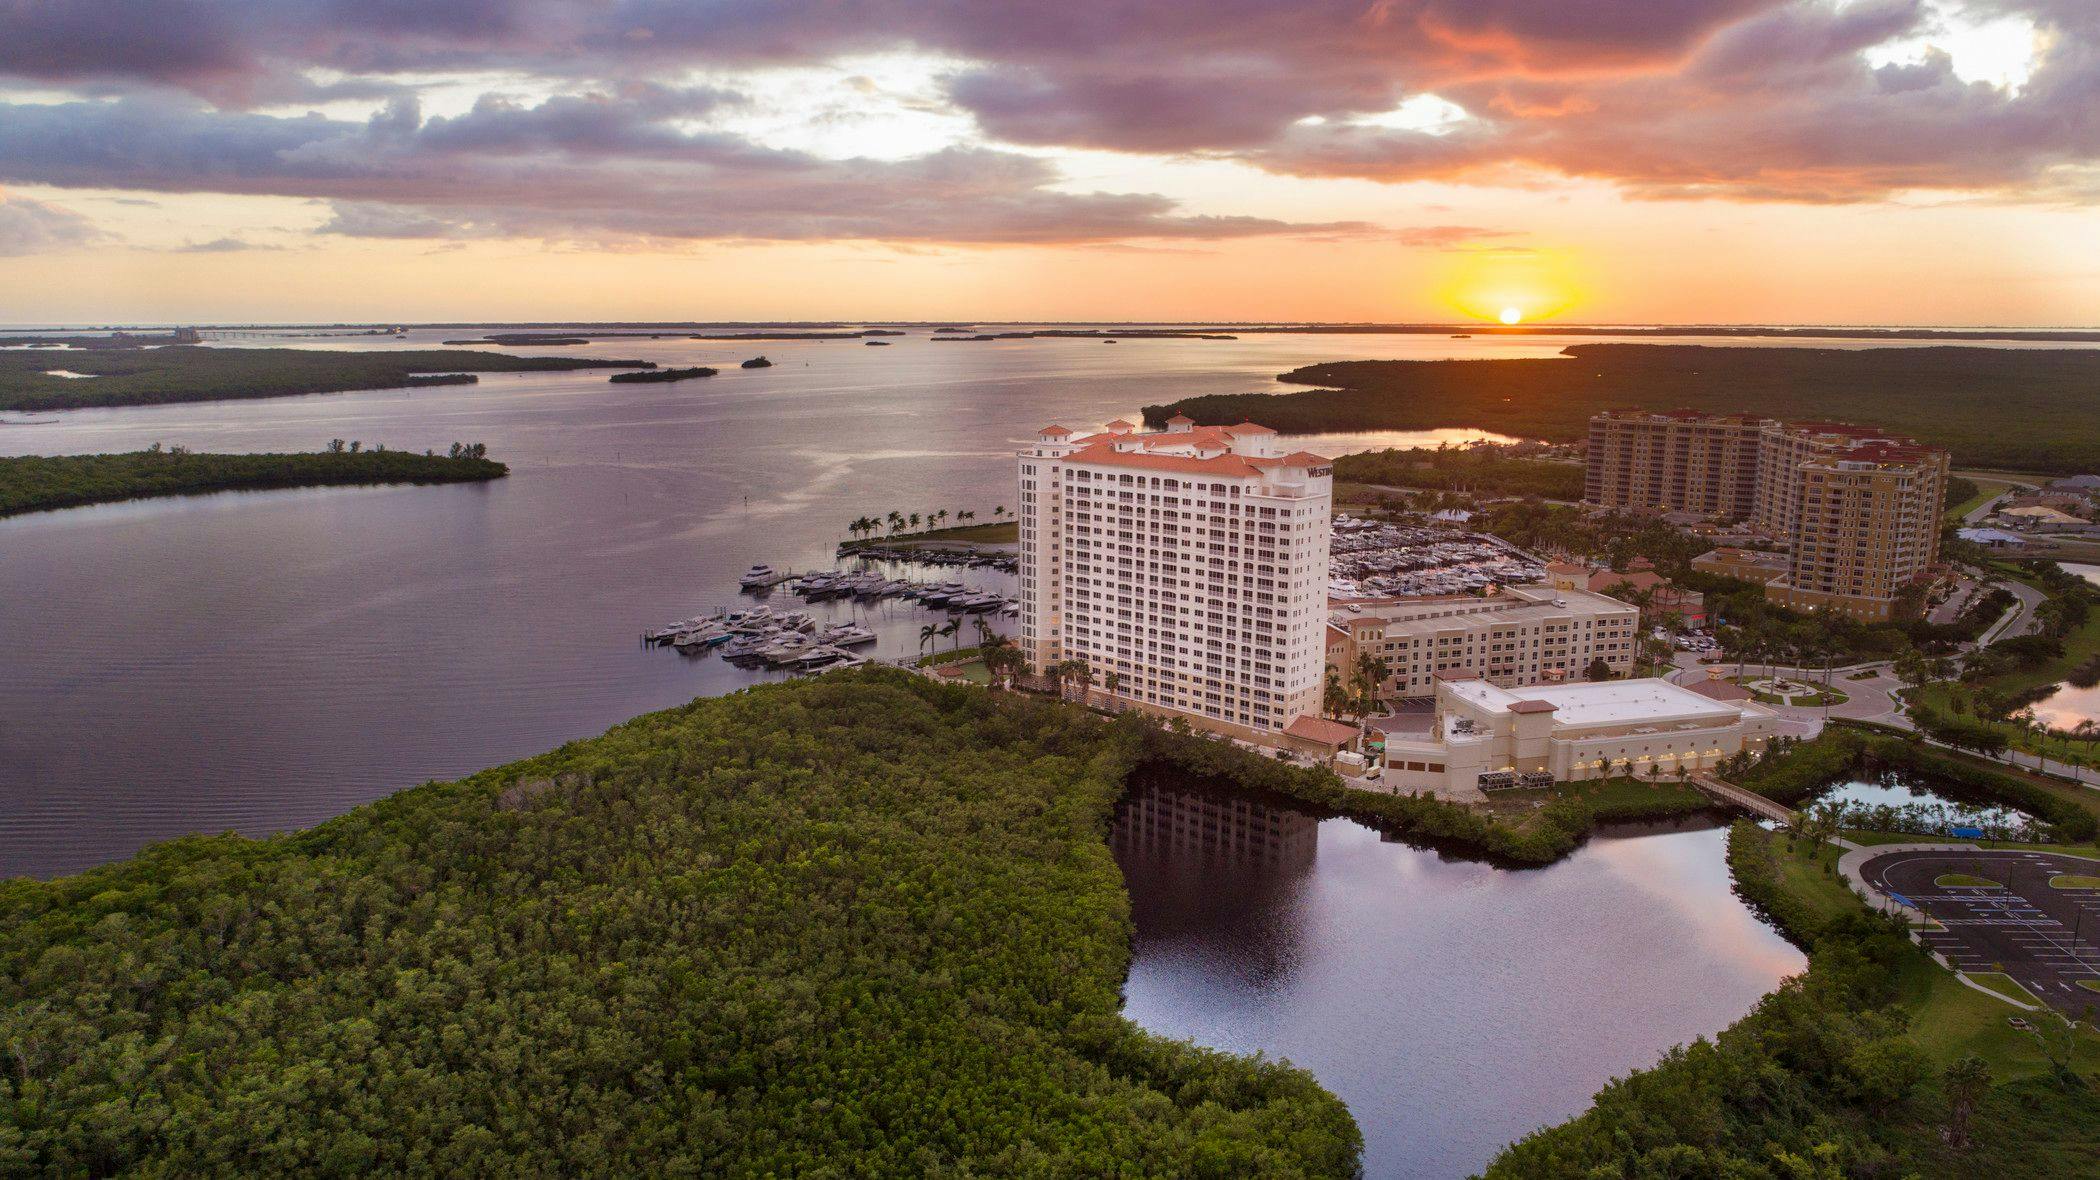 Organic & Natural Health Association will host its 8th annual conference from January 17-19, 2023, at The Westin Cape Coral Resort at Marina Village in Cape Coral, FL, and support a community Hurricane Ian restoration project.